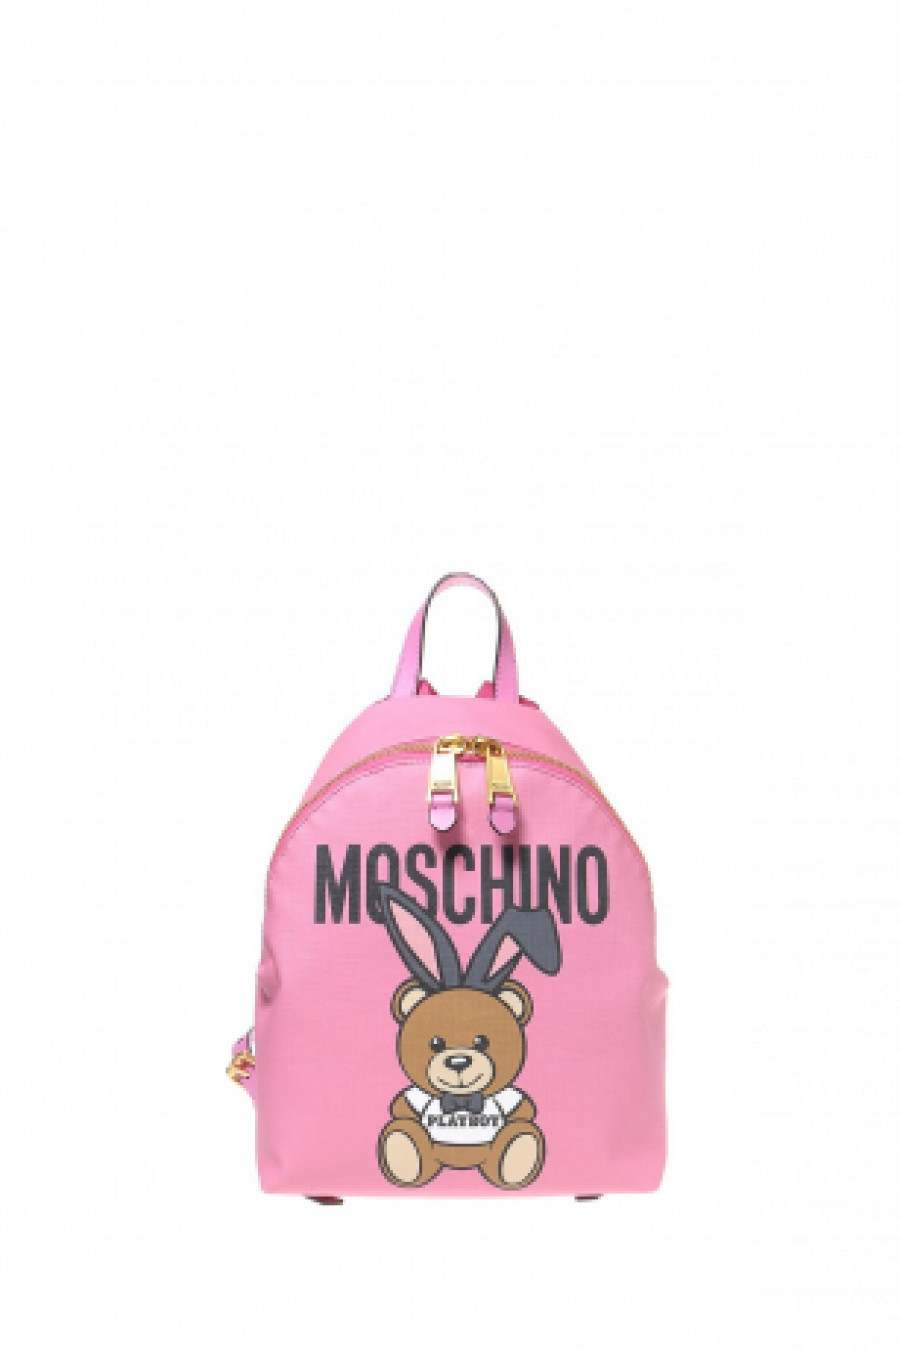 Moschino Women's backpack eco-leather Moschino Bear Playboy pink